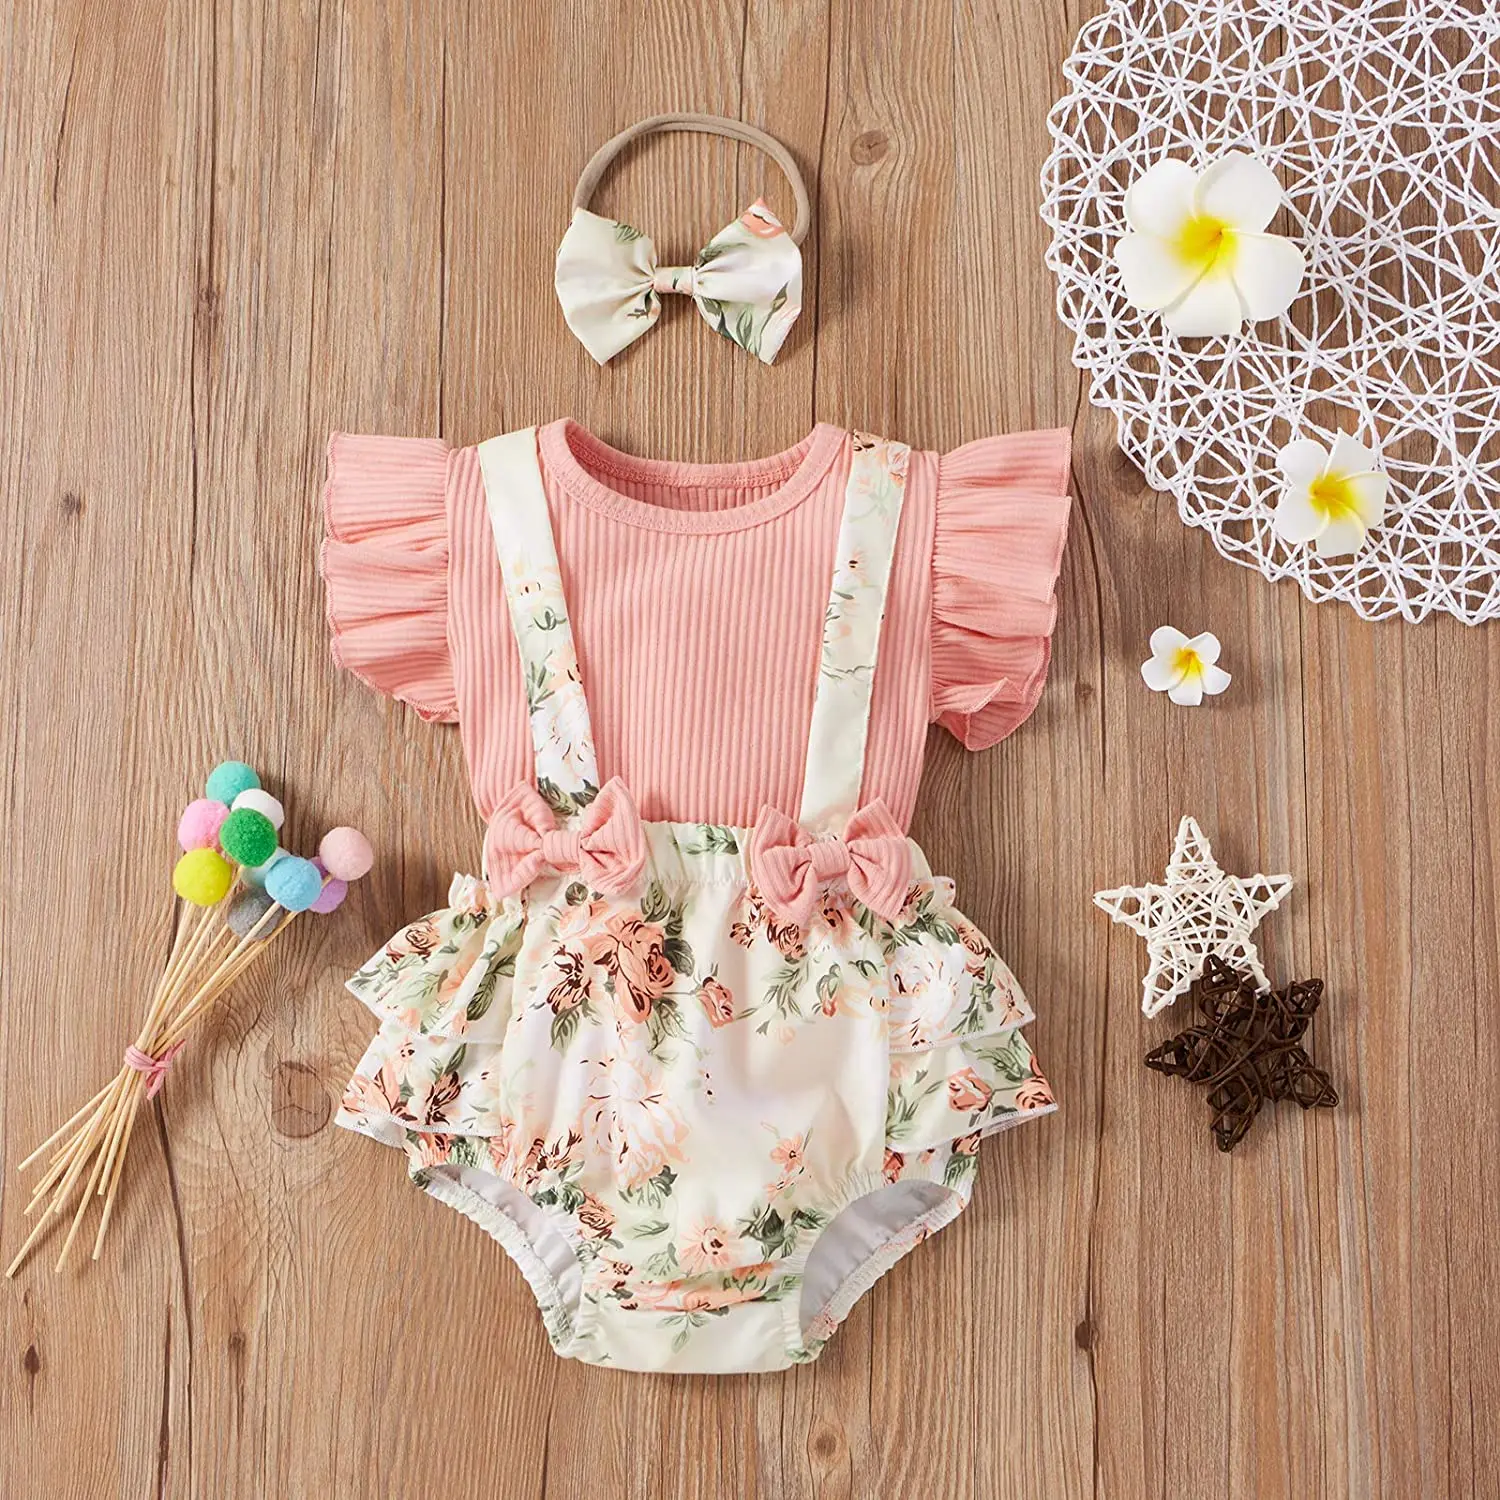 Newborn Infant Baby Girl Ribbed Top+Floral Bow Suspender Shorts+Headband Outfits 